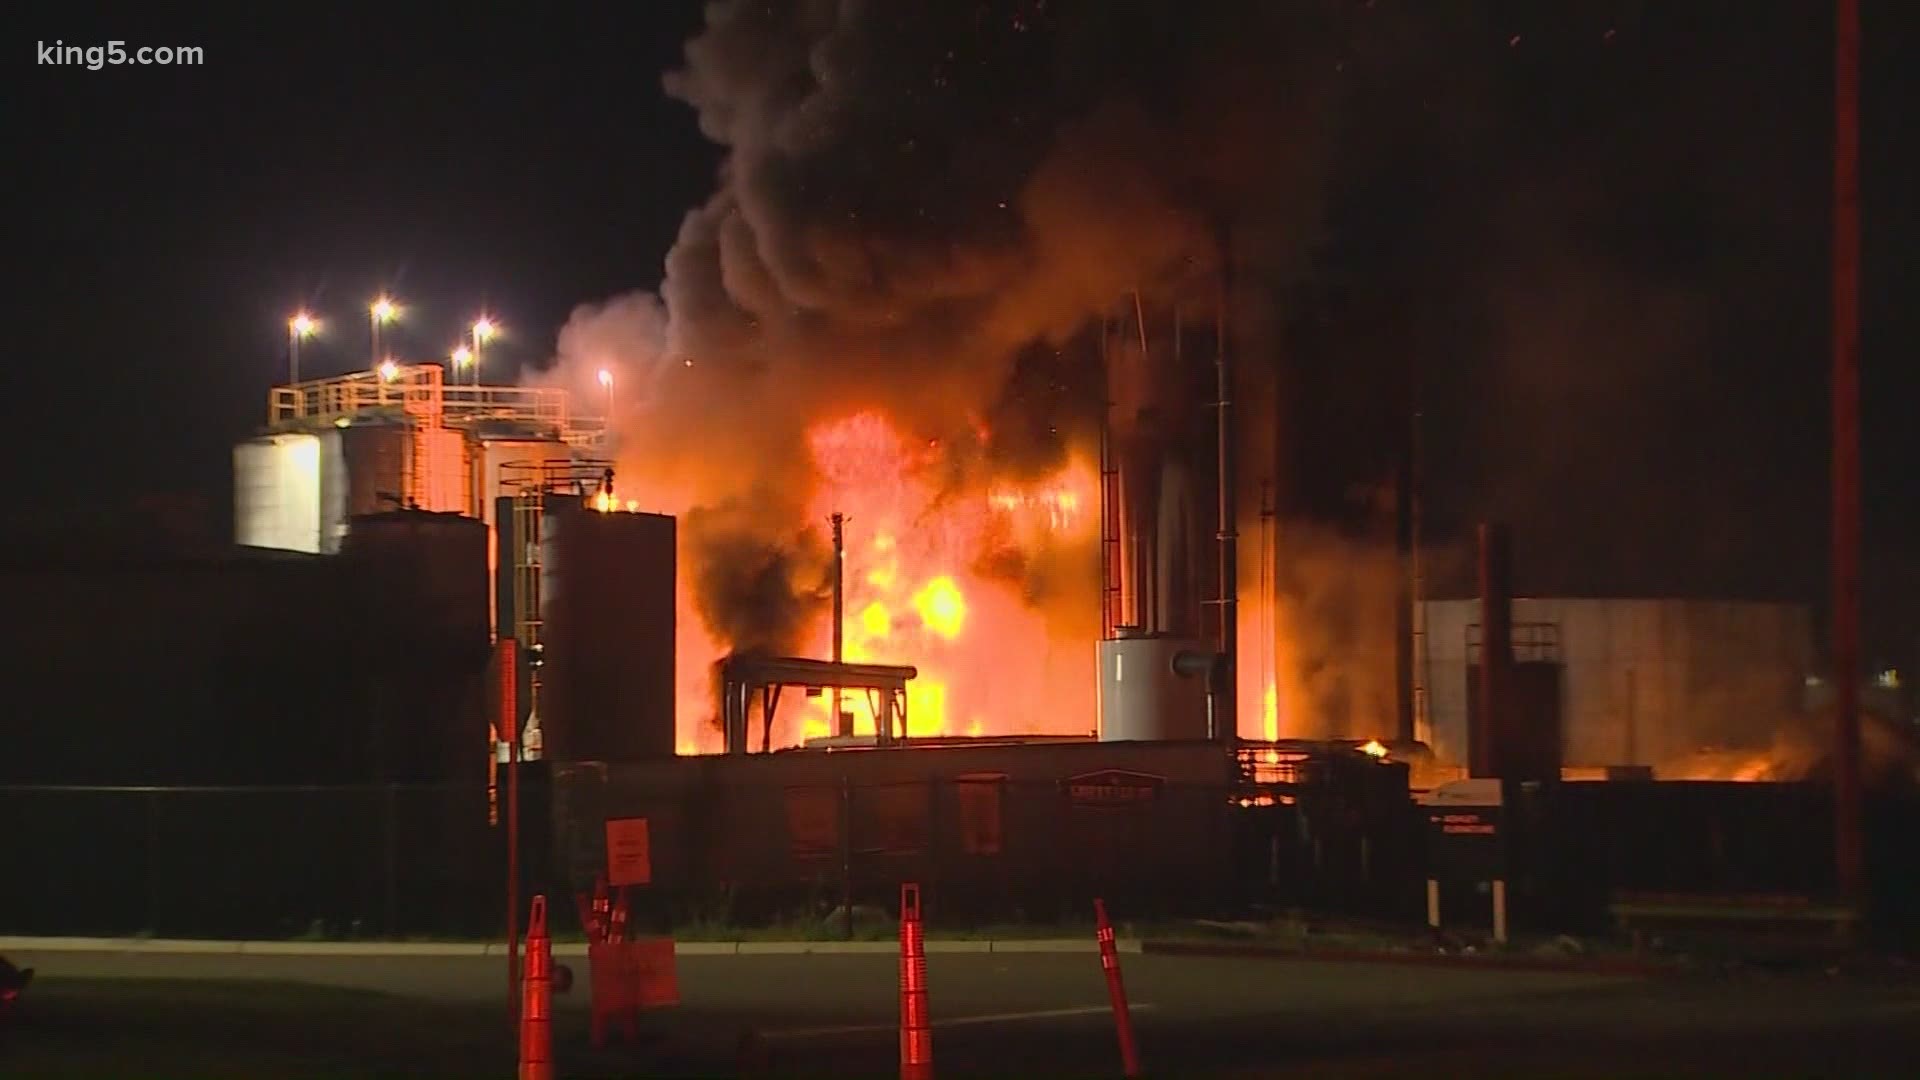 There were small explosions and investigators said mechanical failure was the likely cause of fire at the Gardner Fields asphalt plant.